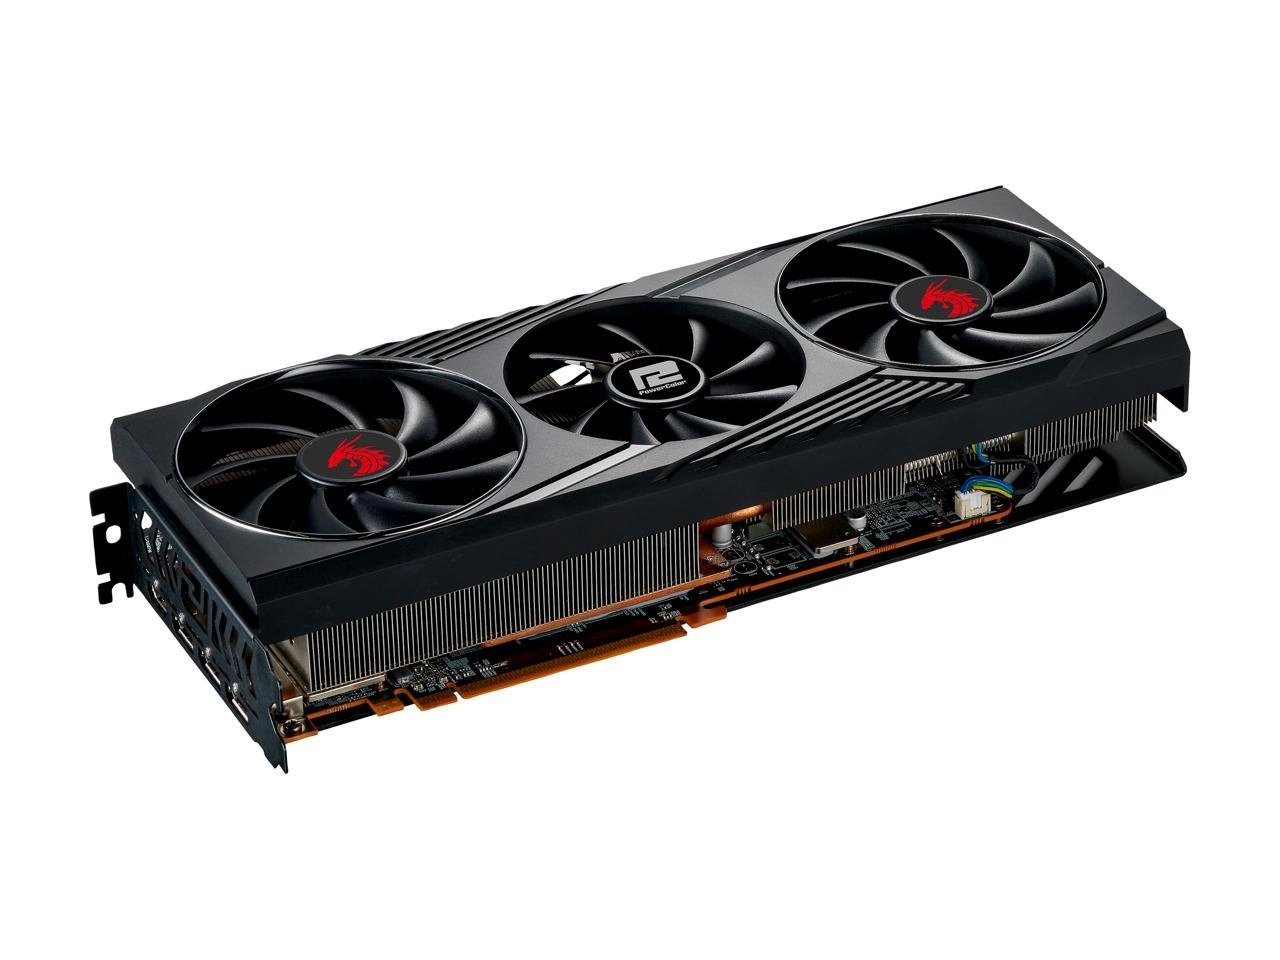 PowerColor Red Dragon AMD Radeon RX 6800 XT 16GB GDDR6 Front View